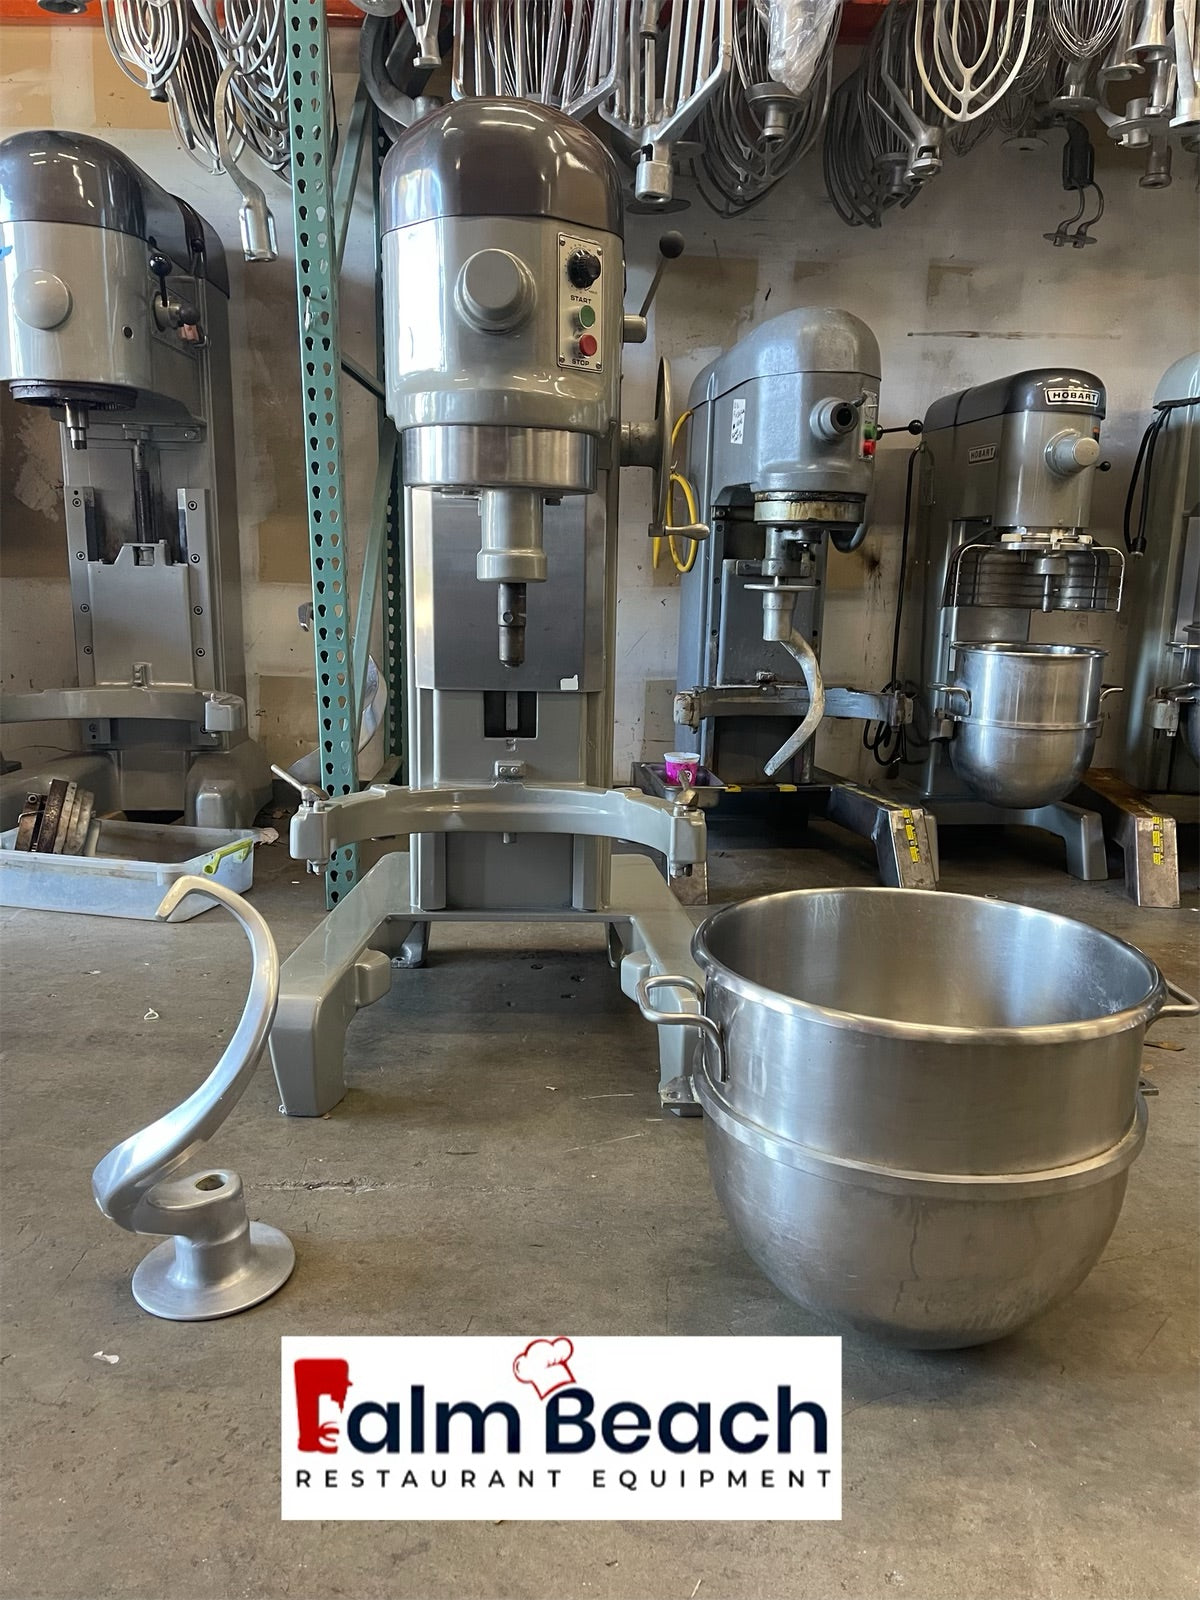 Hobart H600t 60 quart mixer w timer comes with stainless steel bowl and one attachment